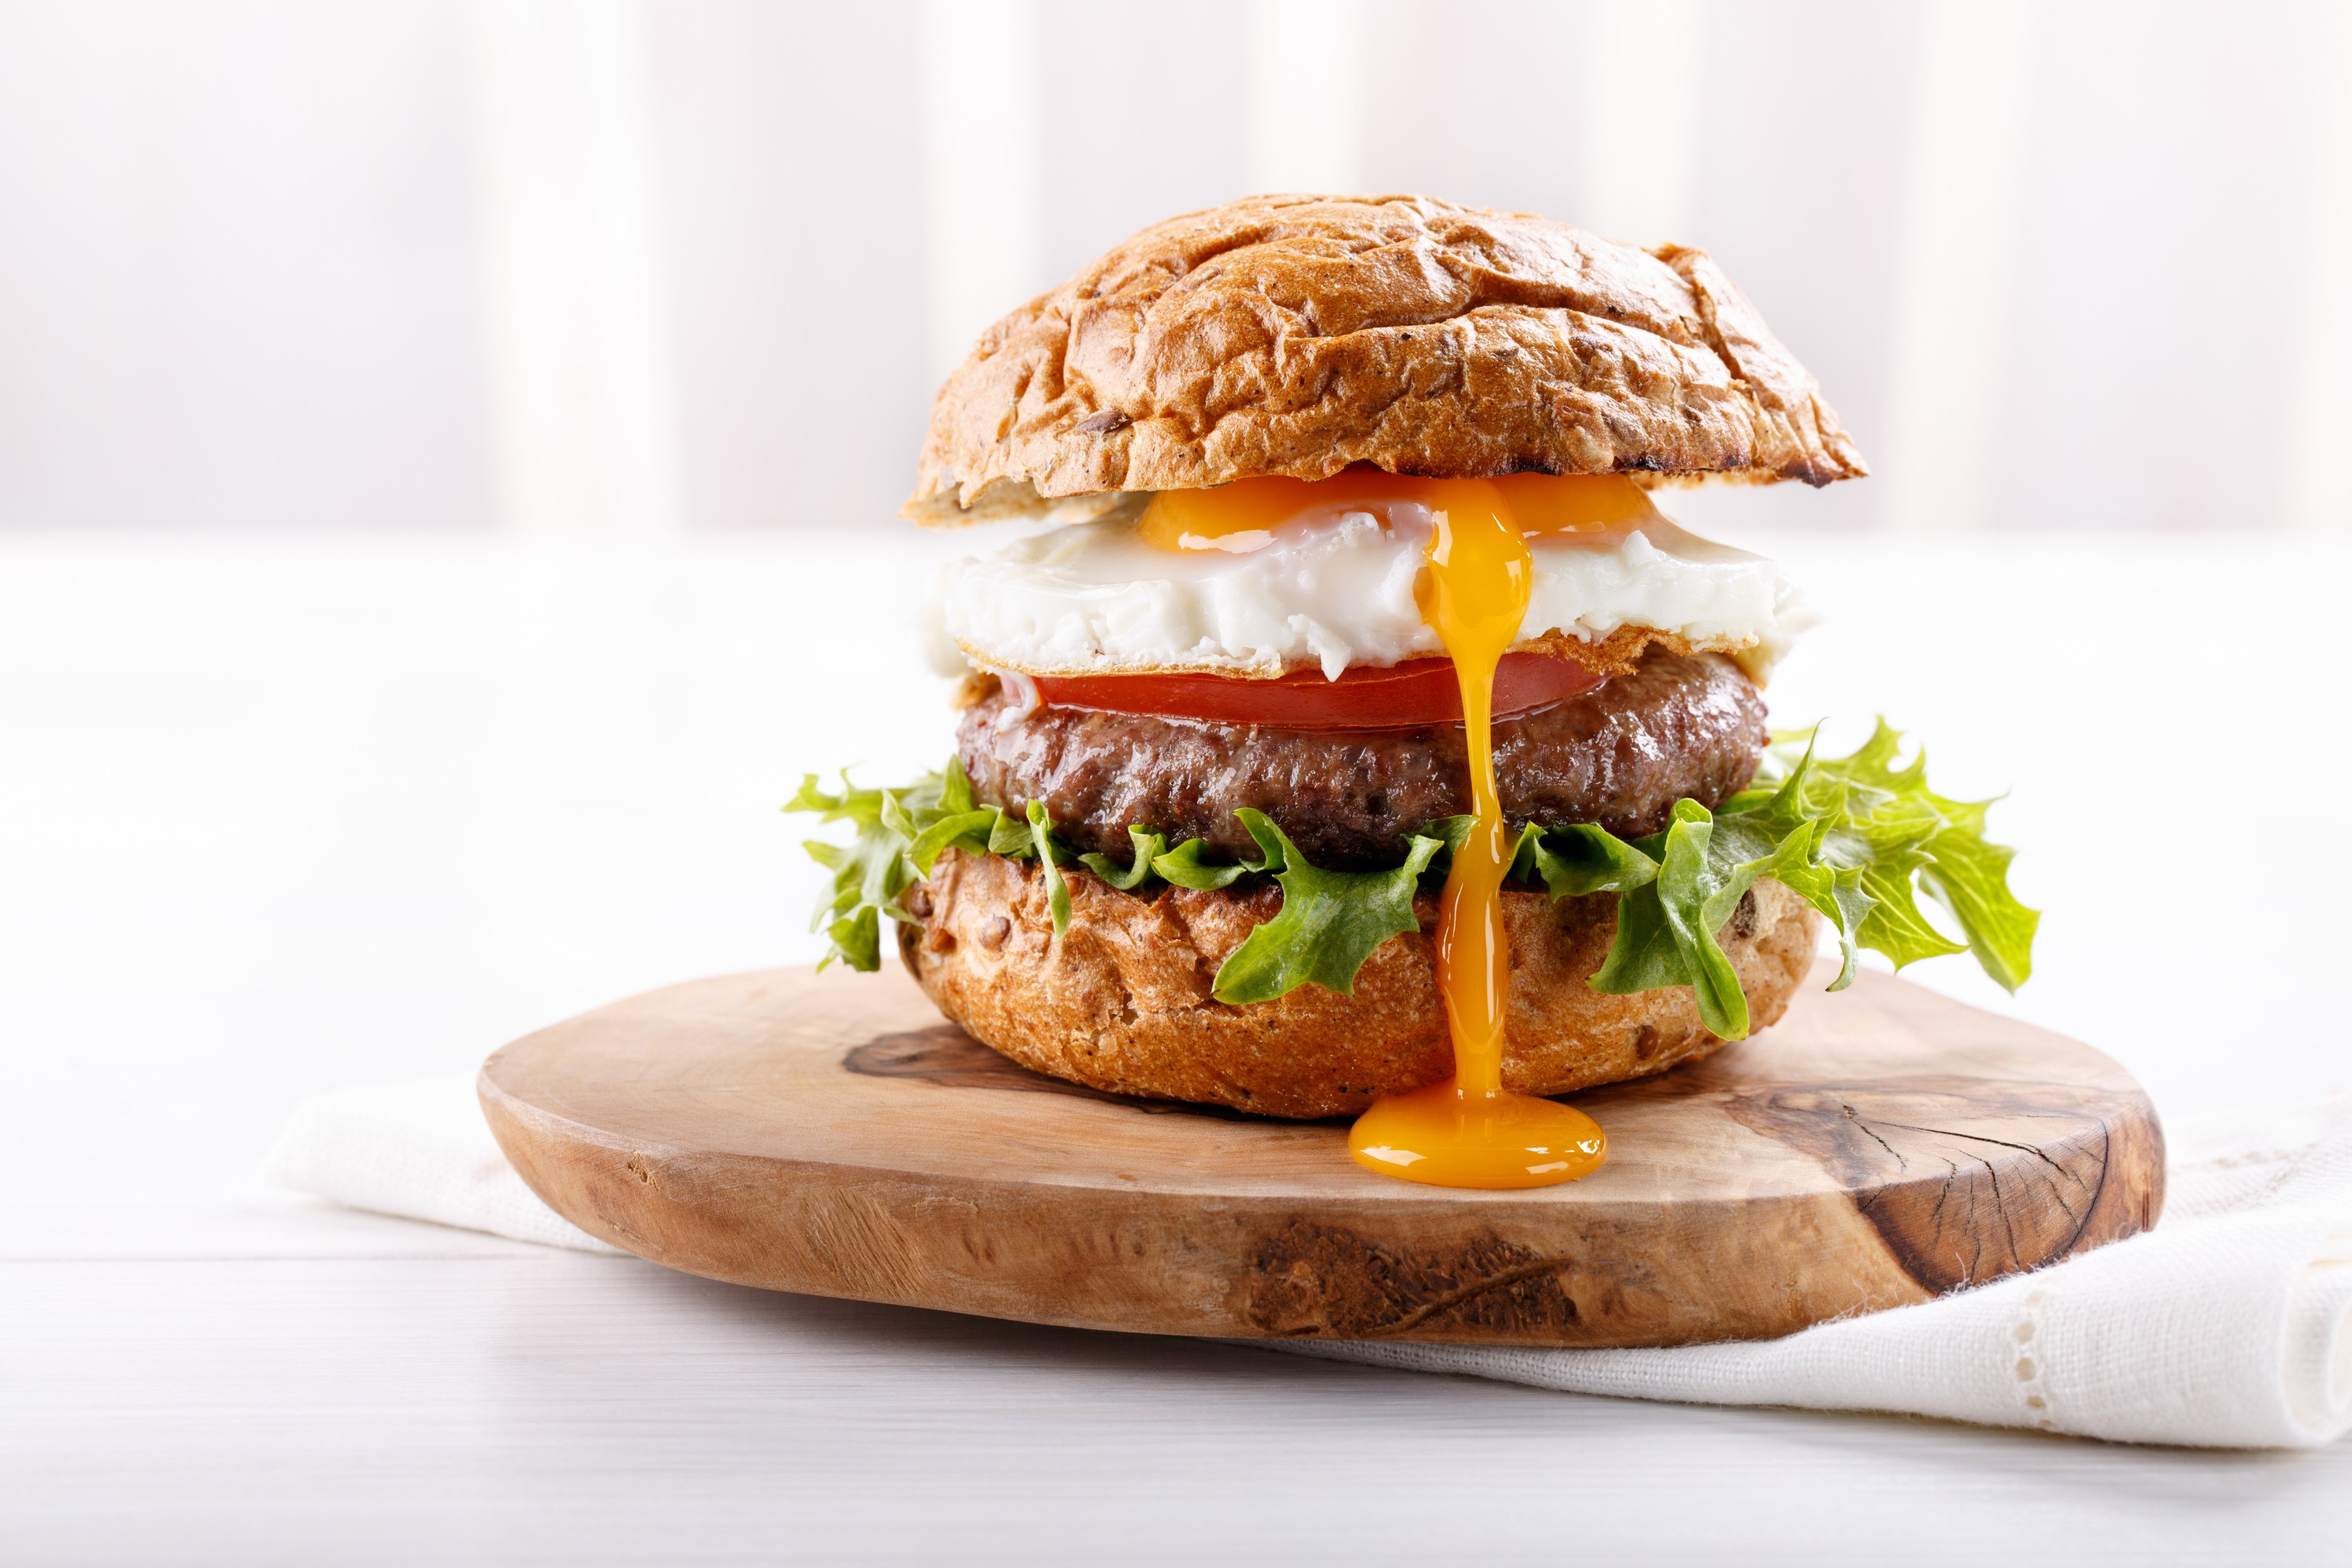 A sunny-side-up egg, double patties, “smash”, peanut butter – burgers can get needlessly complicated. Andrew Sun mouths off about why it is so hard to get a plain, simple hamburger these days. Photo: Shutterstock